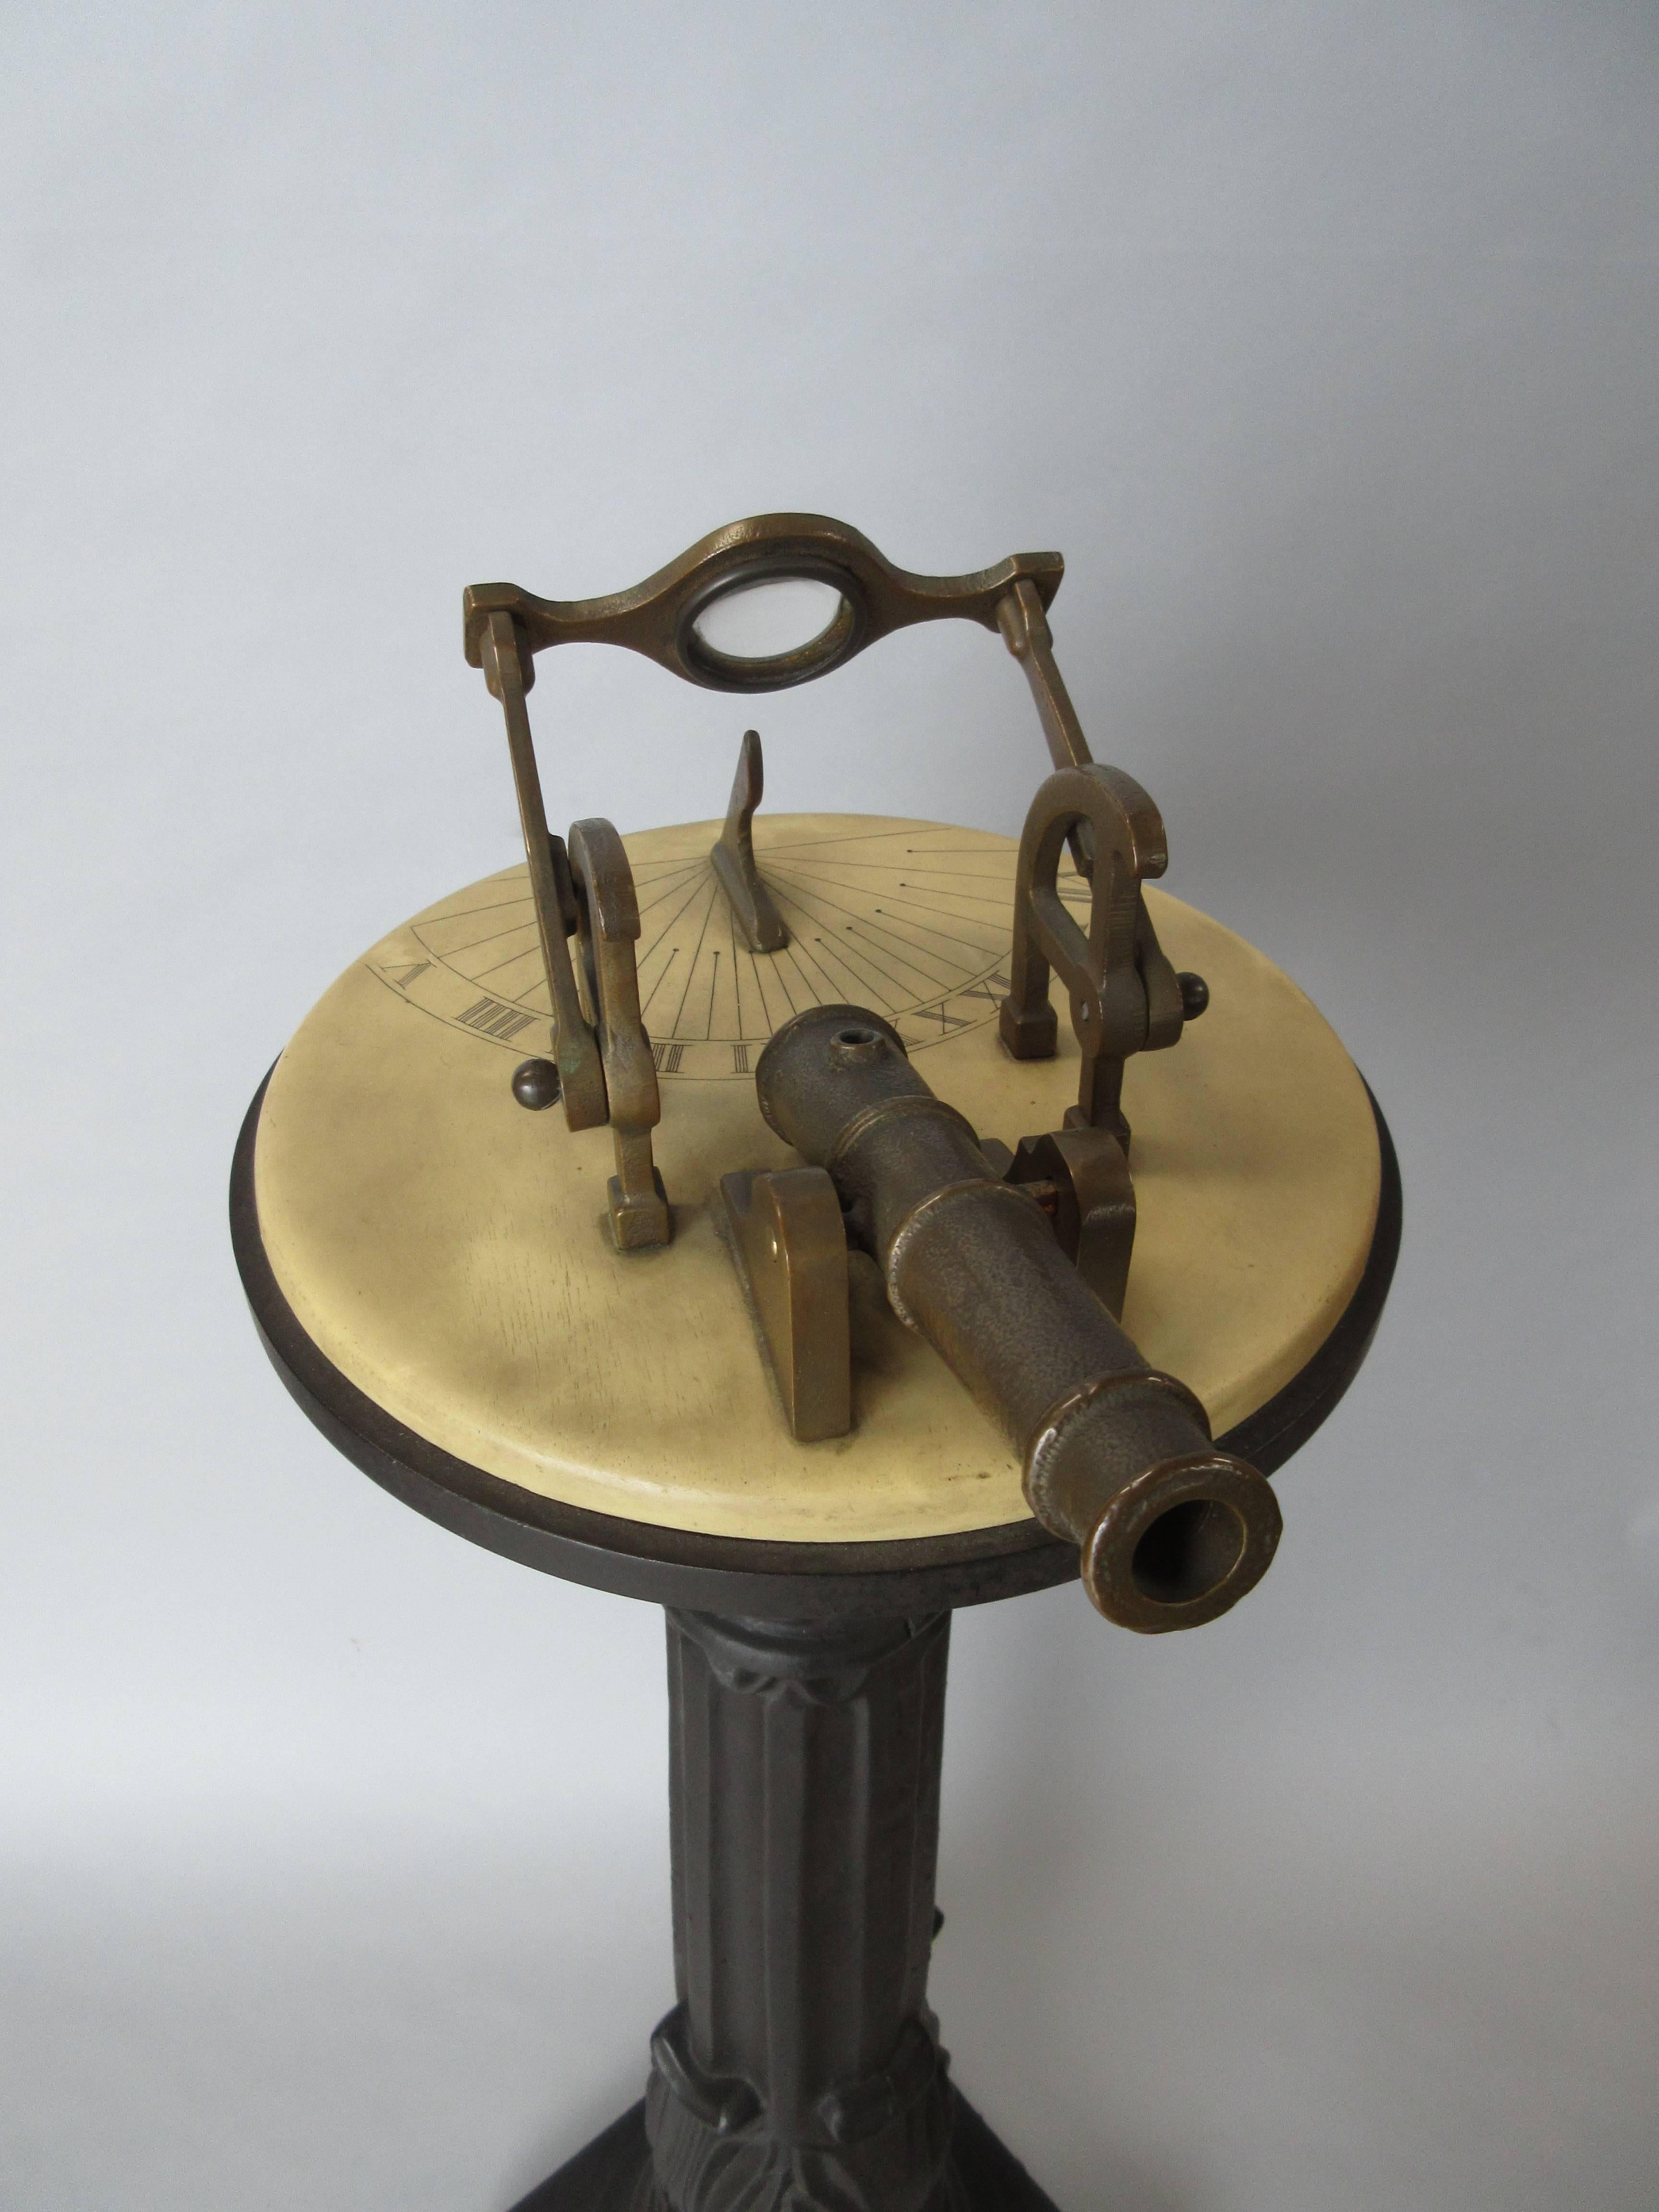 This 'Noon Cannon' is a stunning decorative element standing boldly elegant in the sophisticated den, library or office - the Masculine appeal makes a wonderful Architectural statement and conversation piece.

The Noon Cannon was positioned in